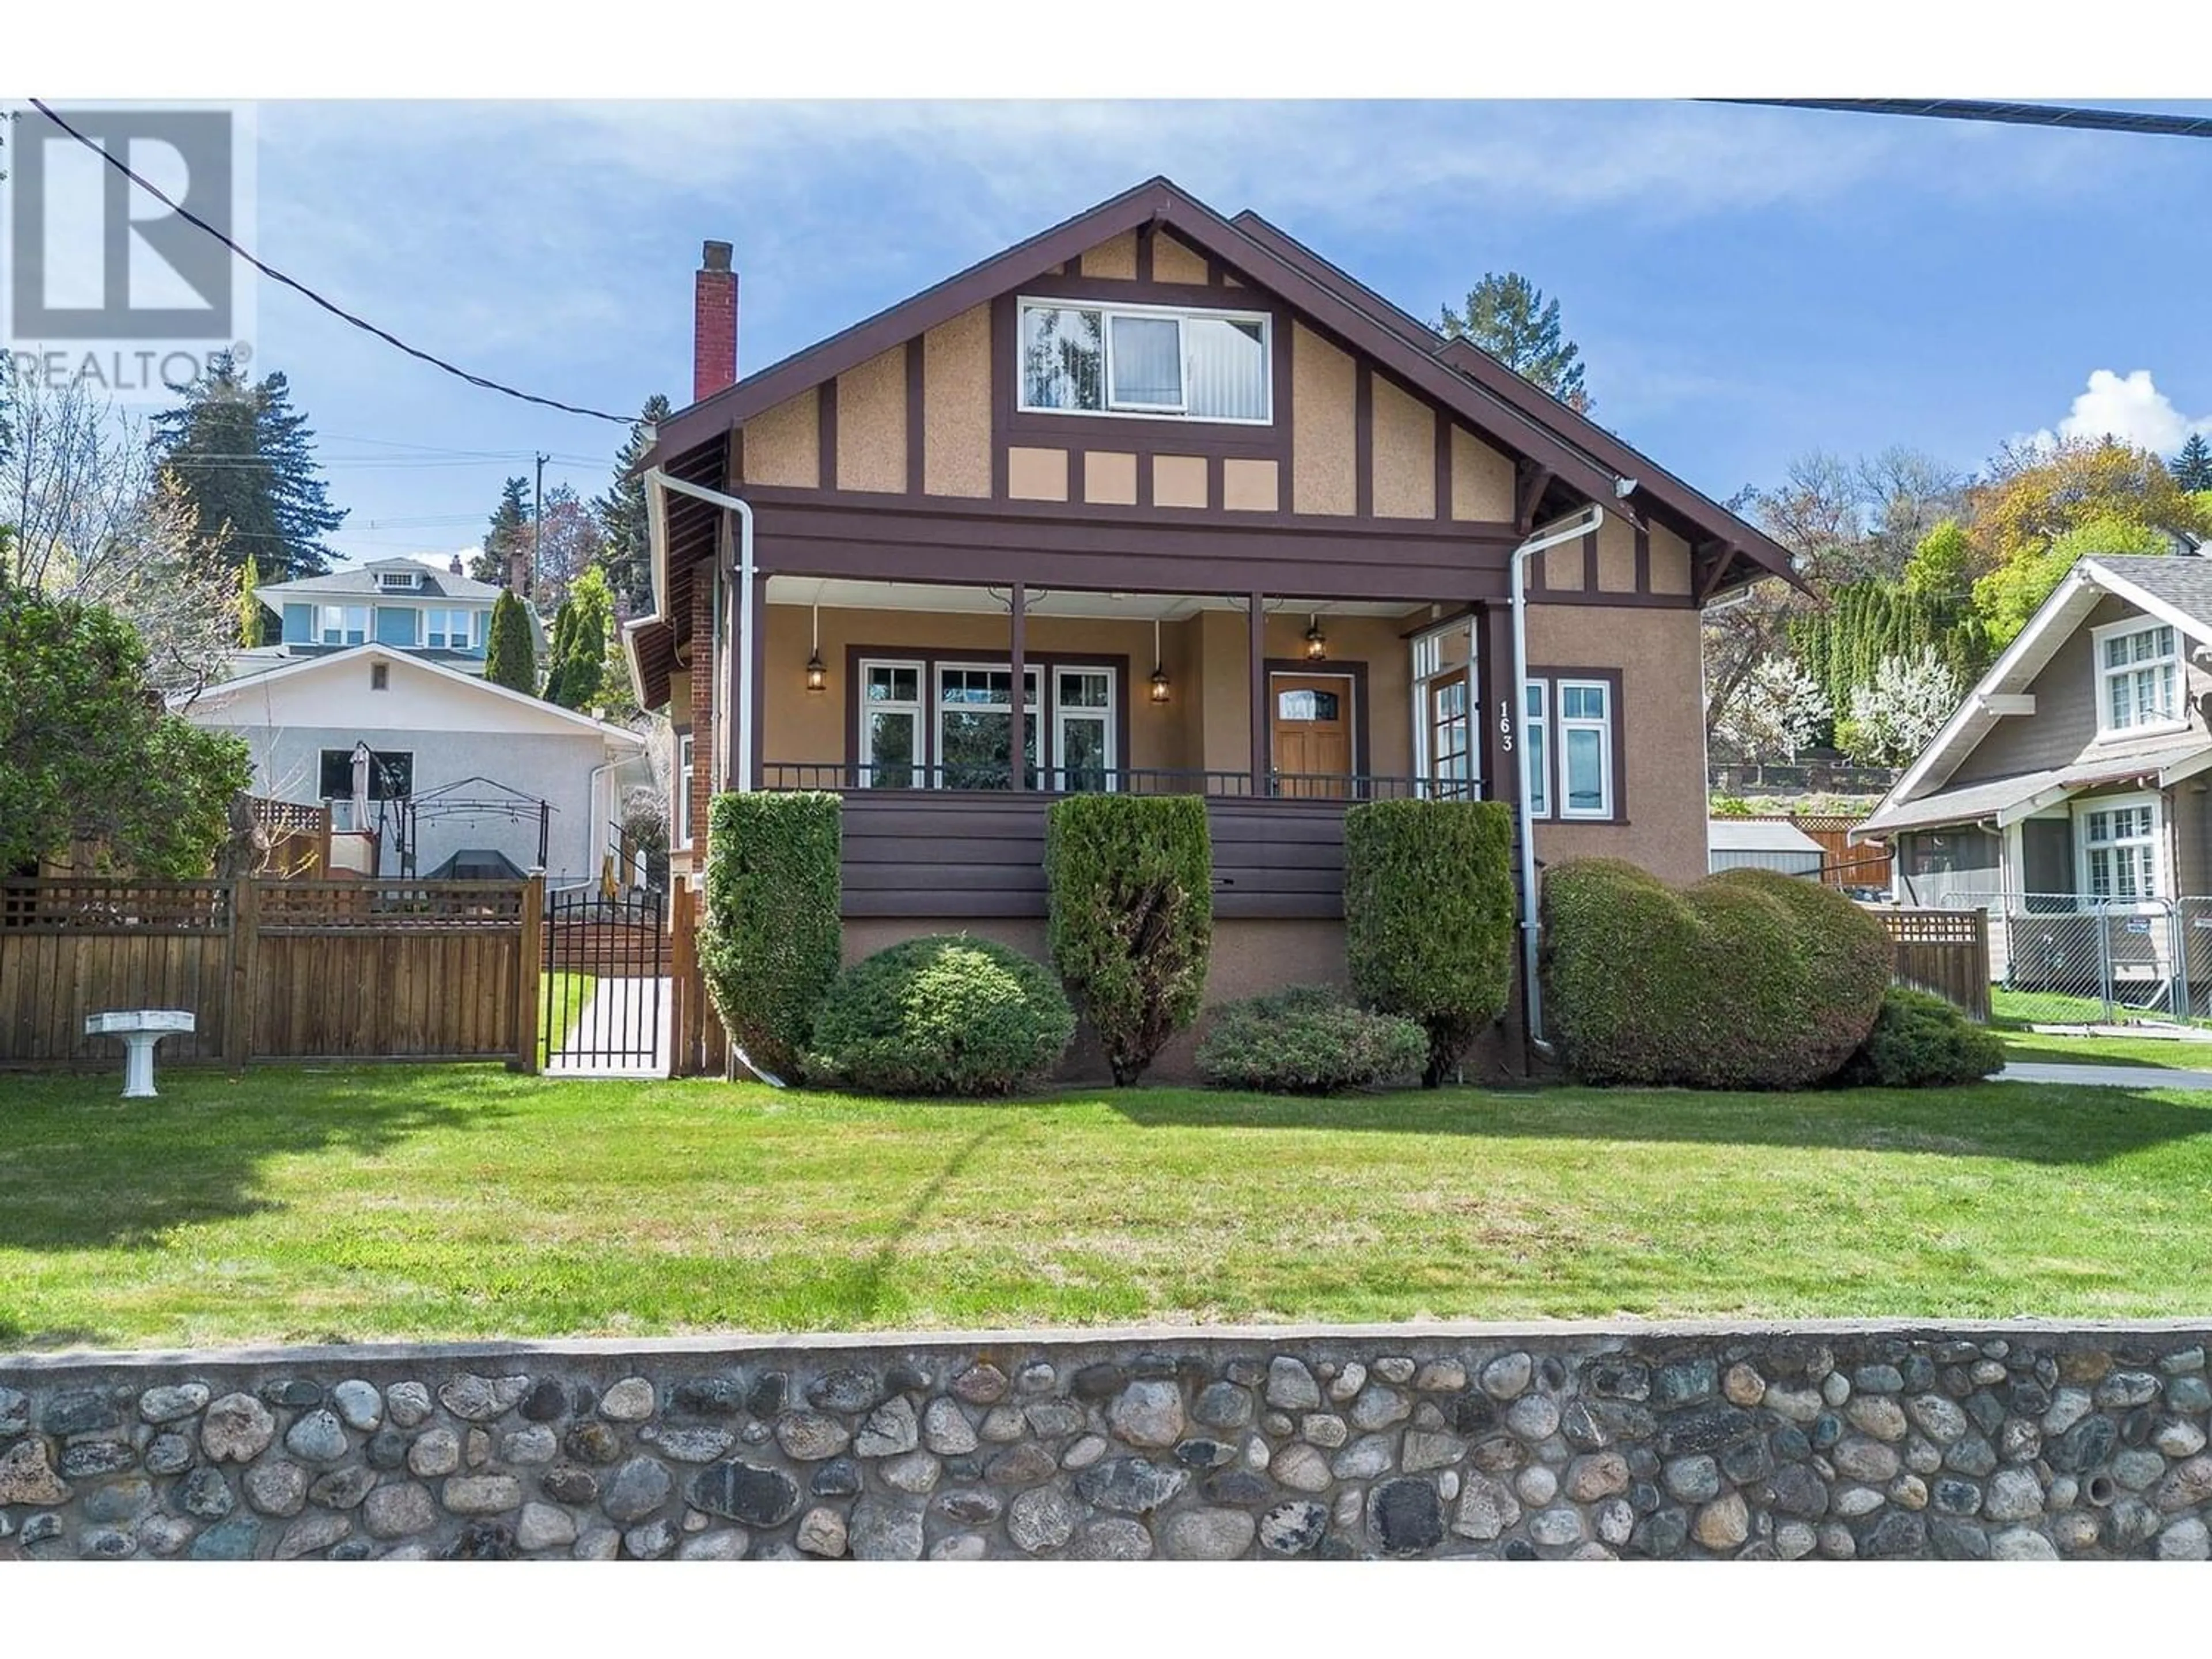 Frontside or backside of a home for 163 ST PAUL STREET W, Kamloops British Columbia V2C1G2